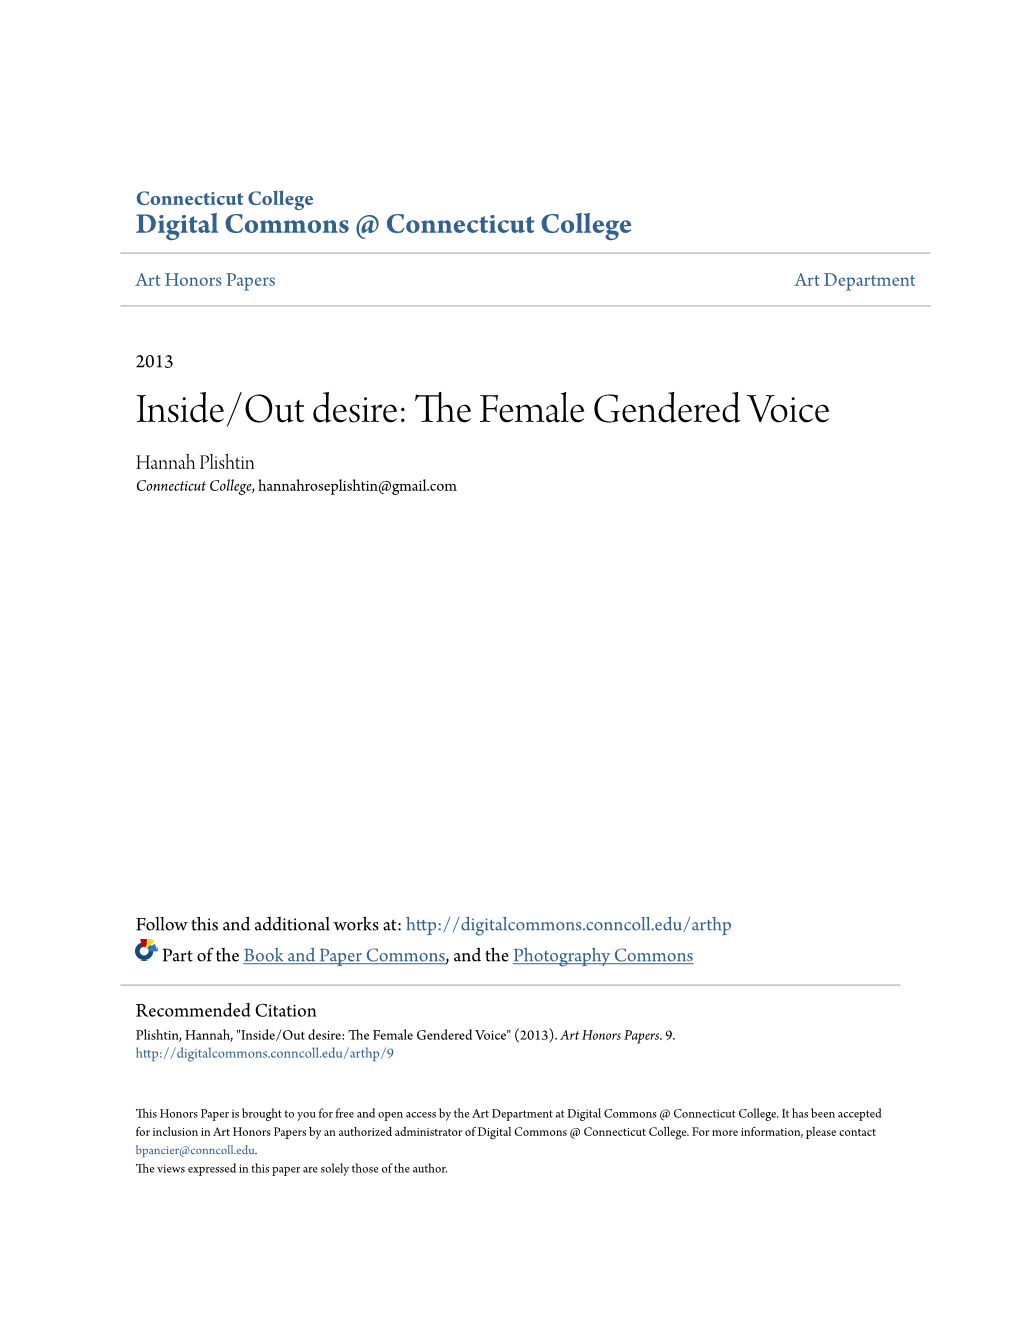 The Female Gendered Voice